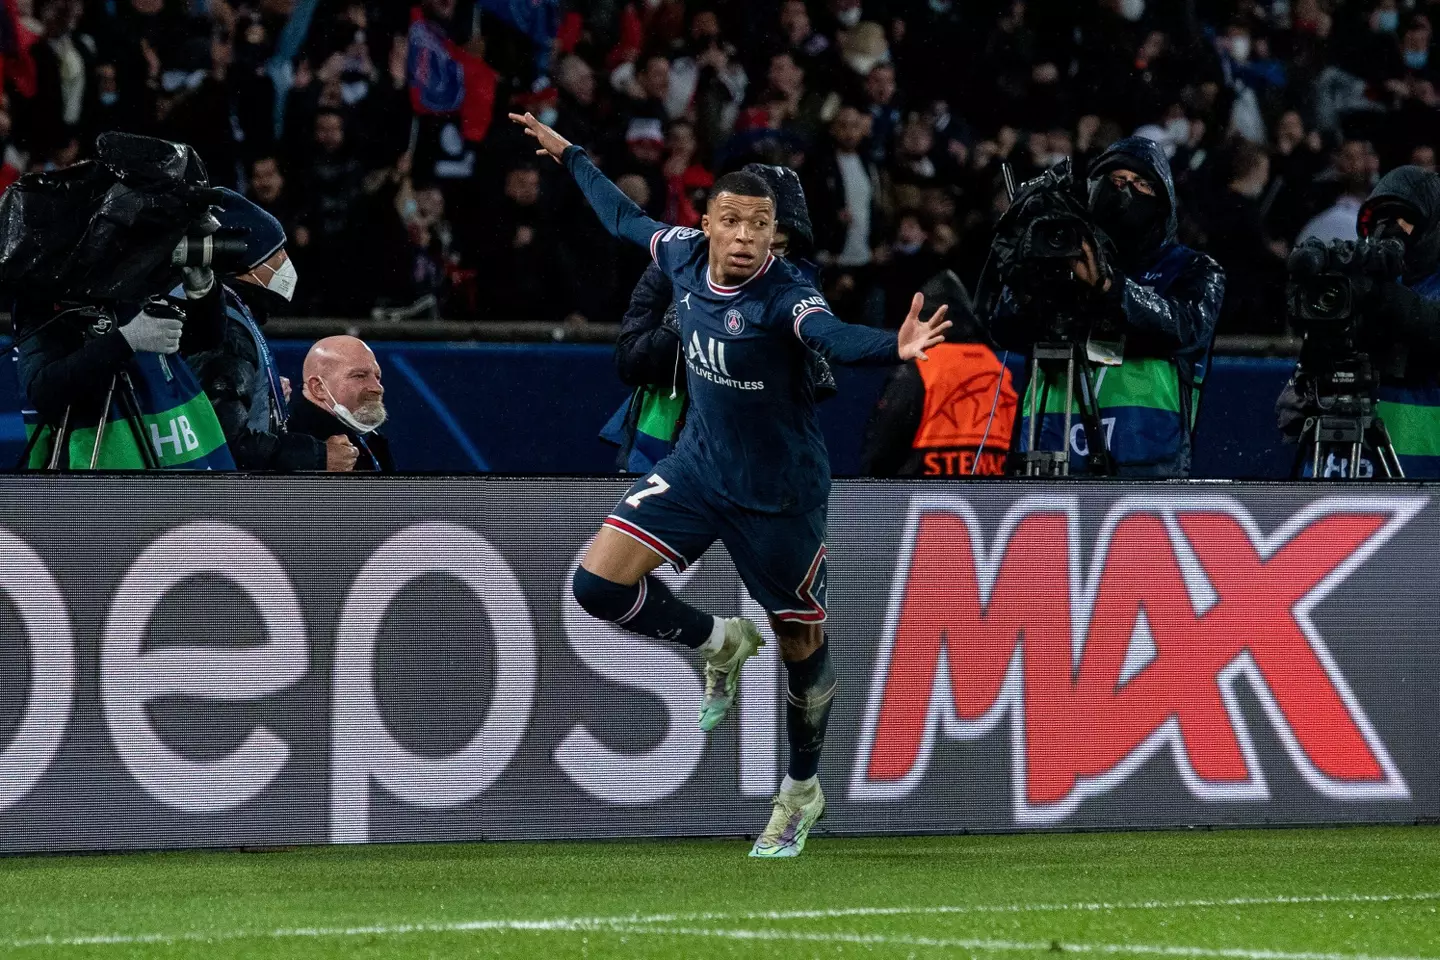 Mbappe scored a brilliant winner against Real Madrid on Tuesday (Image: PA)